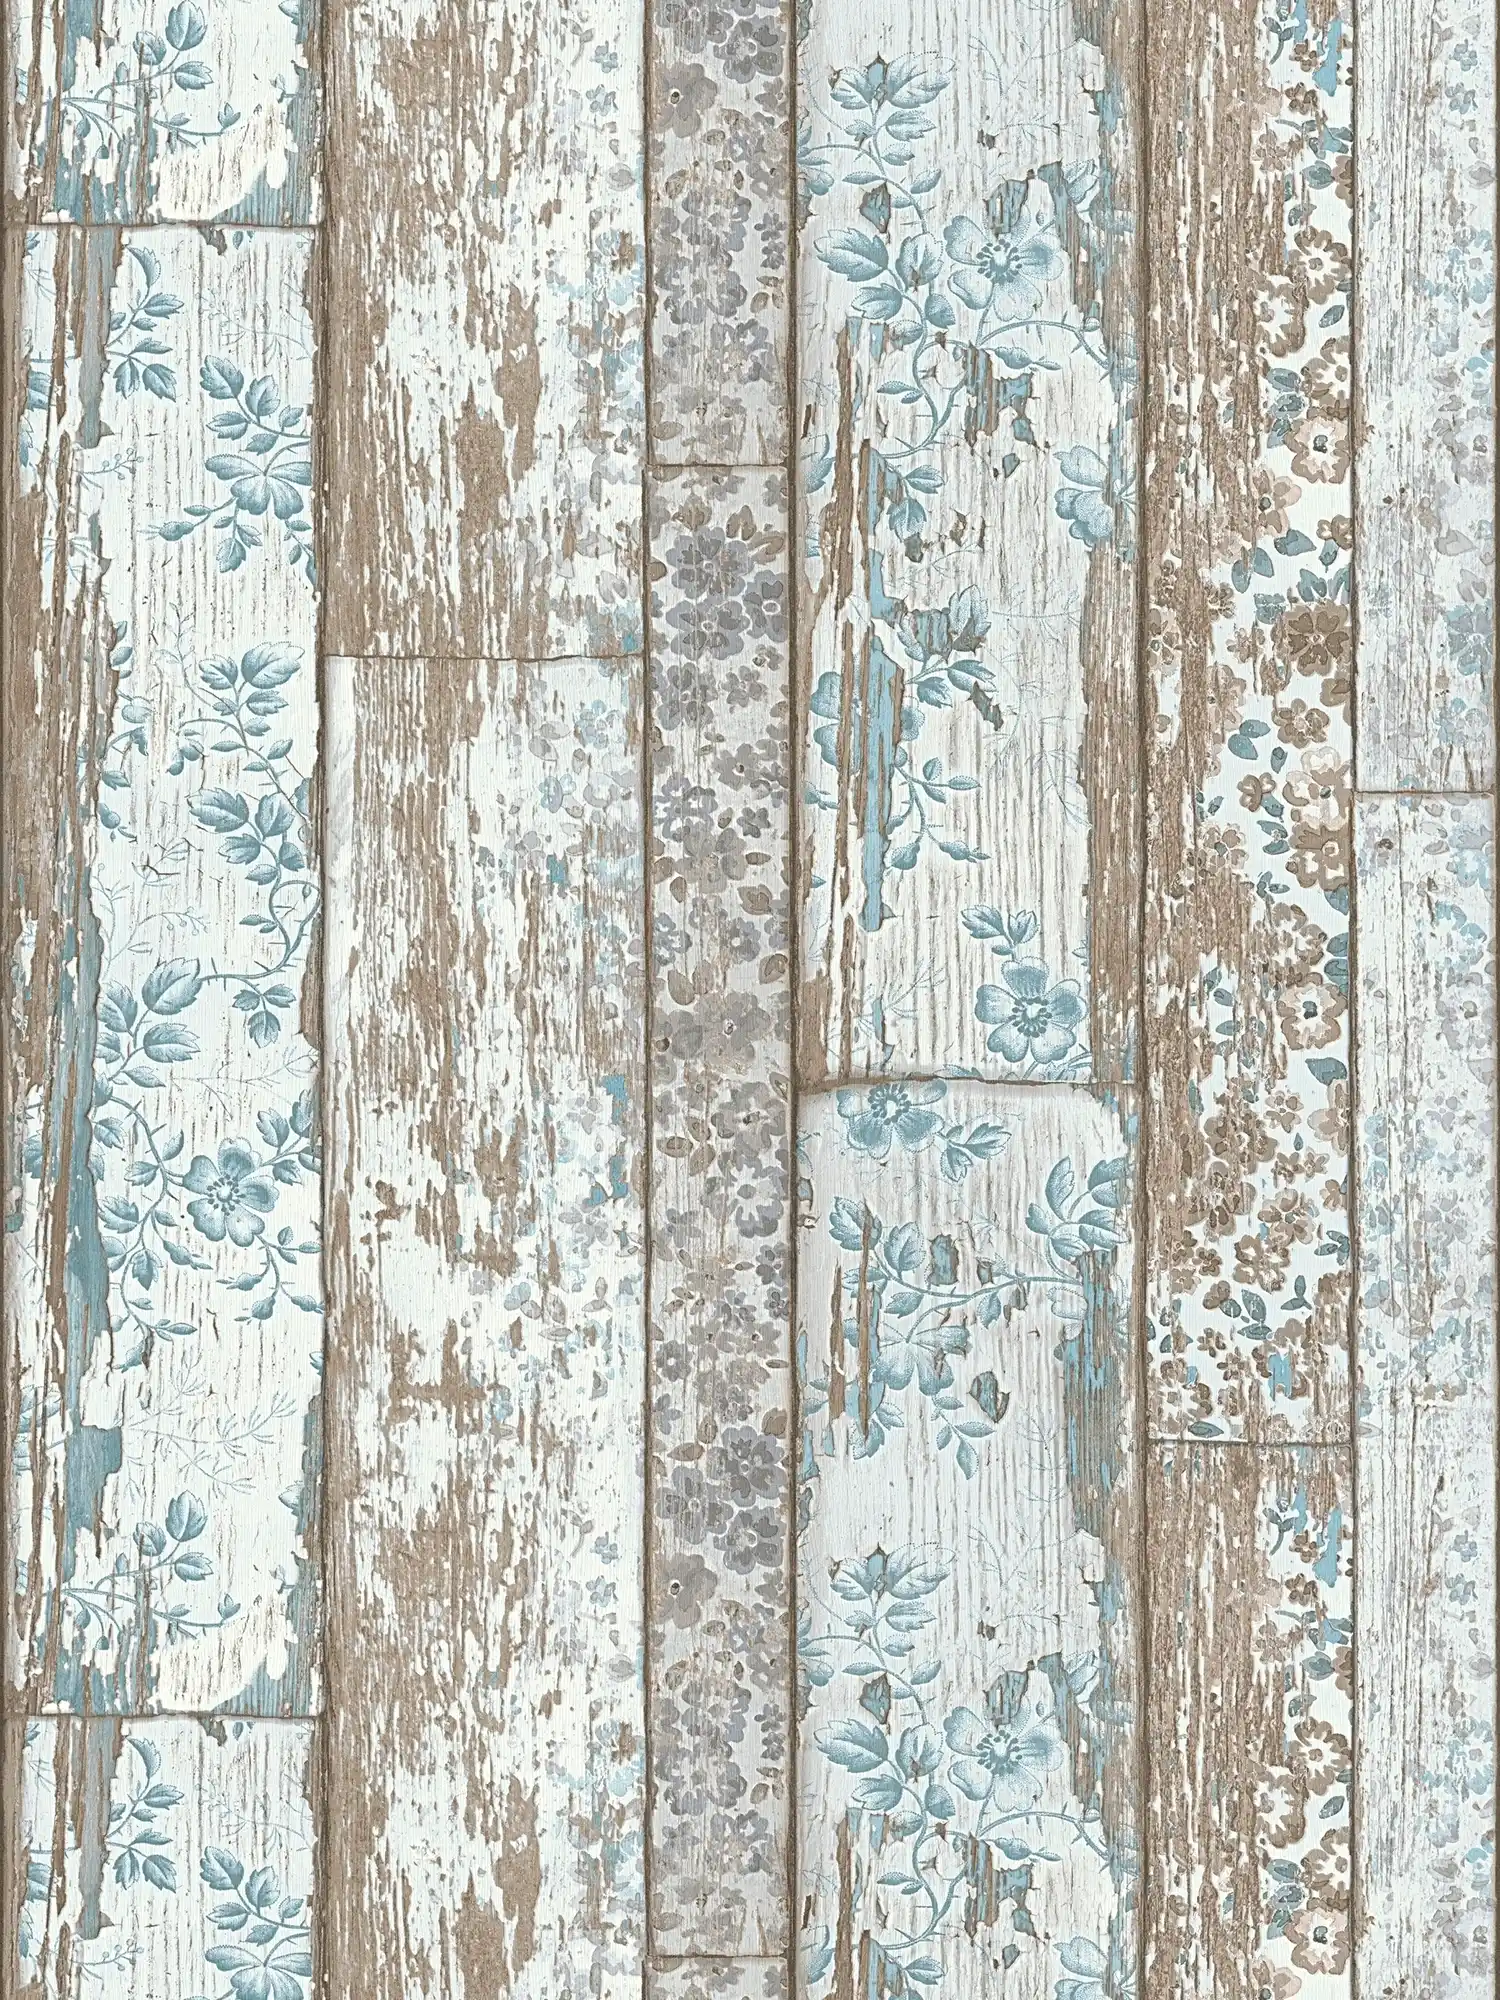         Country house wallpaper plank look with vintage floral print - blue, brown, grey
    